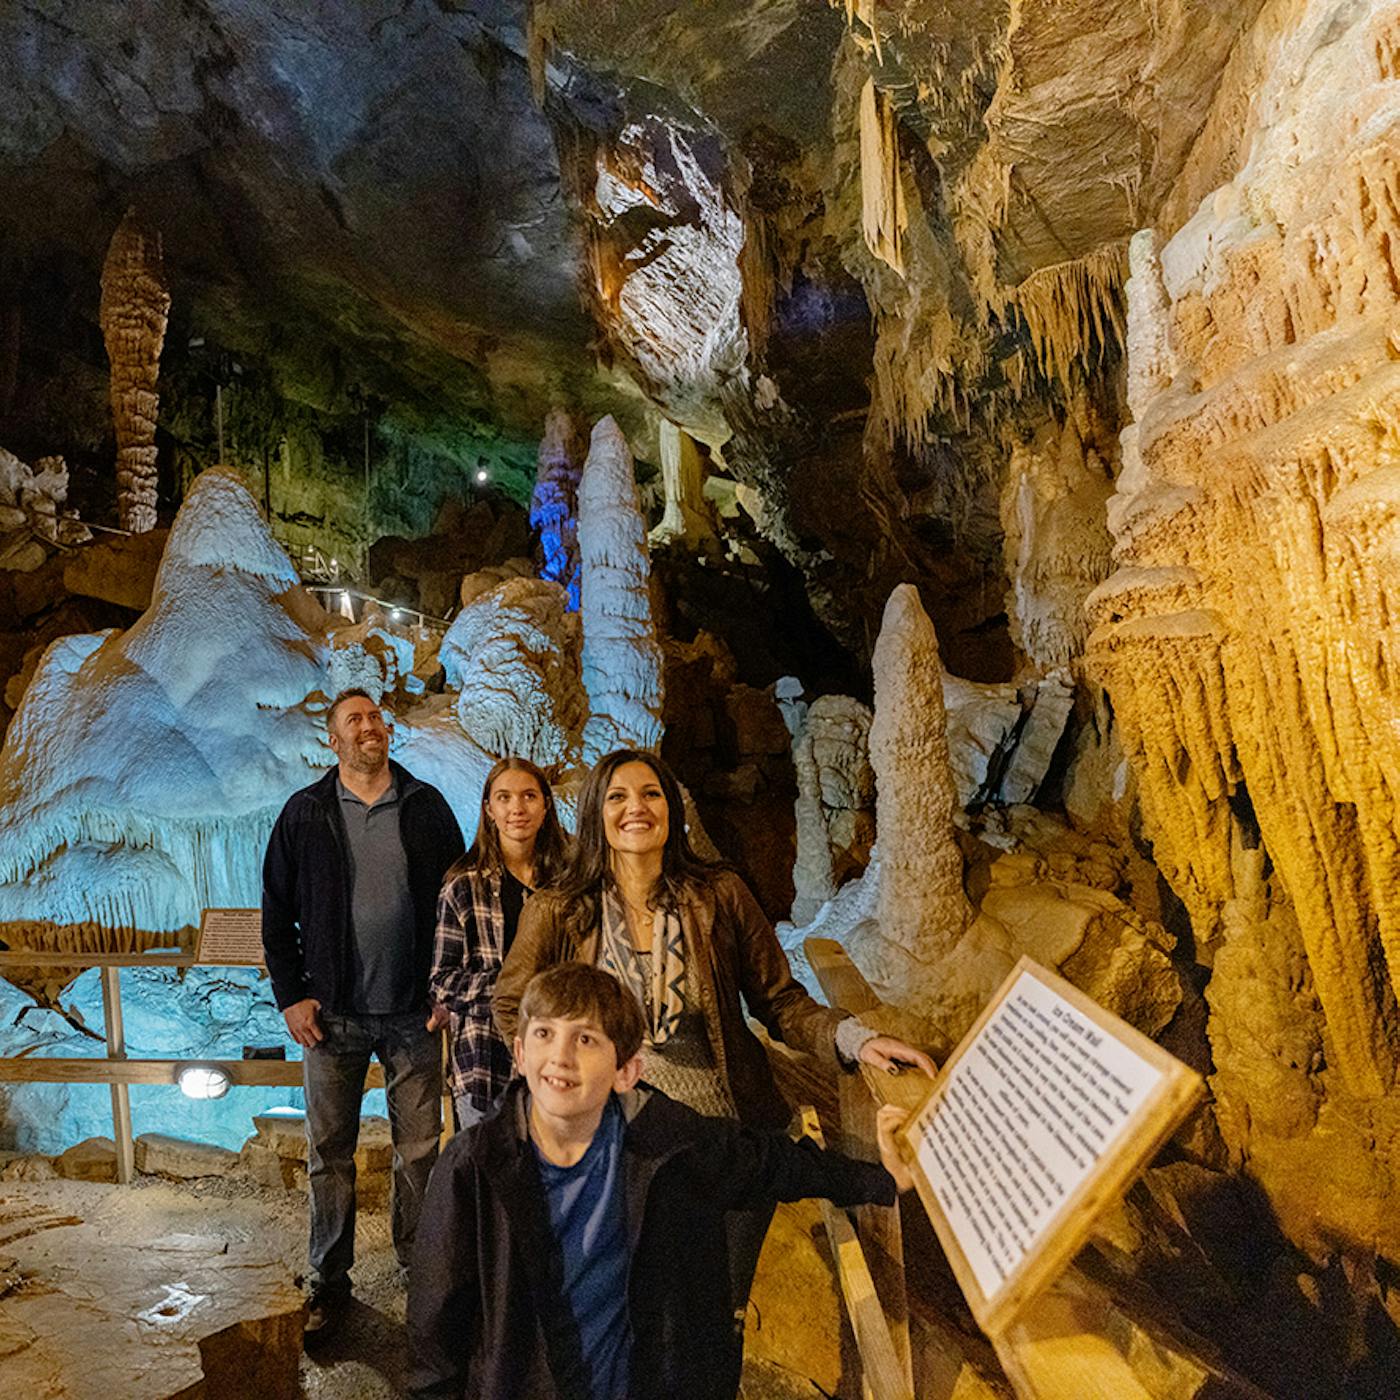 Family at Lost World Caverns in Lewisburg, West Virginia (photo courtesy of Greenbrier County CVB))